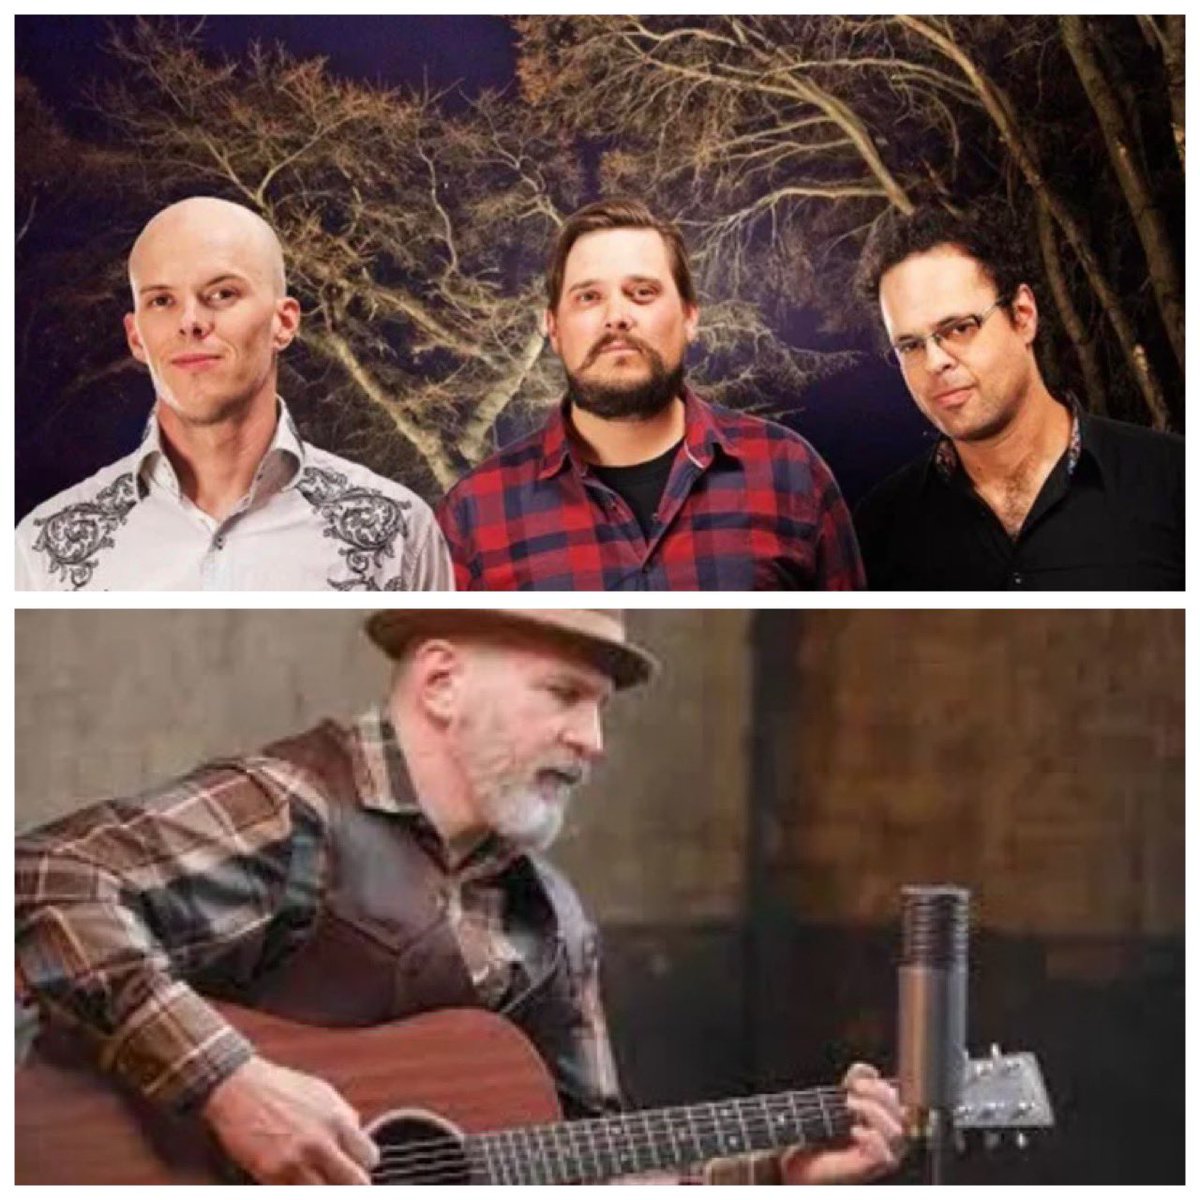 🔔 2 new shows: Dry Bones - folk super group of Leonard Podolak, JD Edwards & Nathan Rogers - on Sat, June 1 at 8 pm; and Fuller Hull playing a matinee on Sat, June 29 at 3 pm. Tix on sale now at shipandplough.ca! 🎶 #gimli #publife #livemusic #MBlive #concertseries